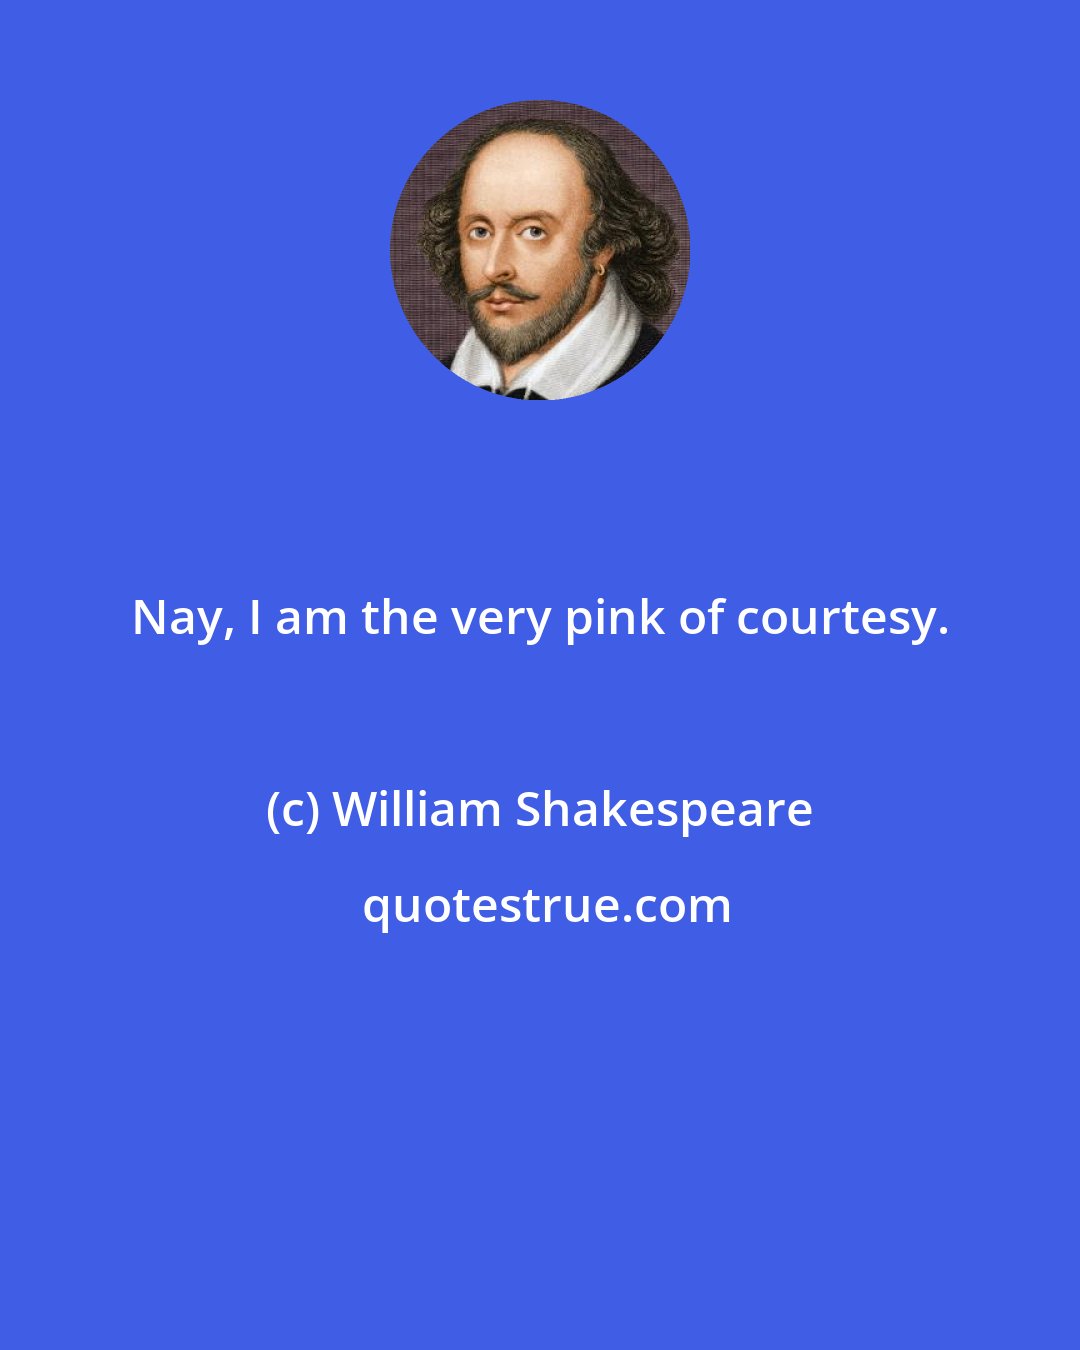 William Shakespeare: Nay, I am the very pink of courtesy.